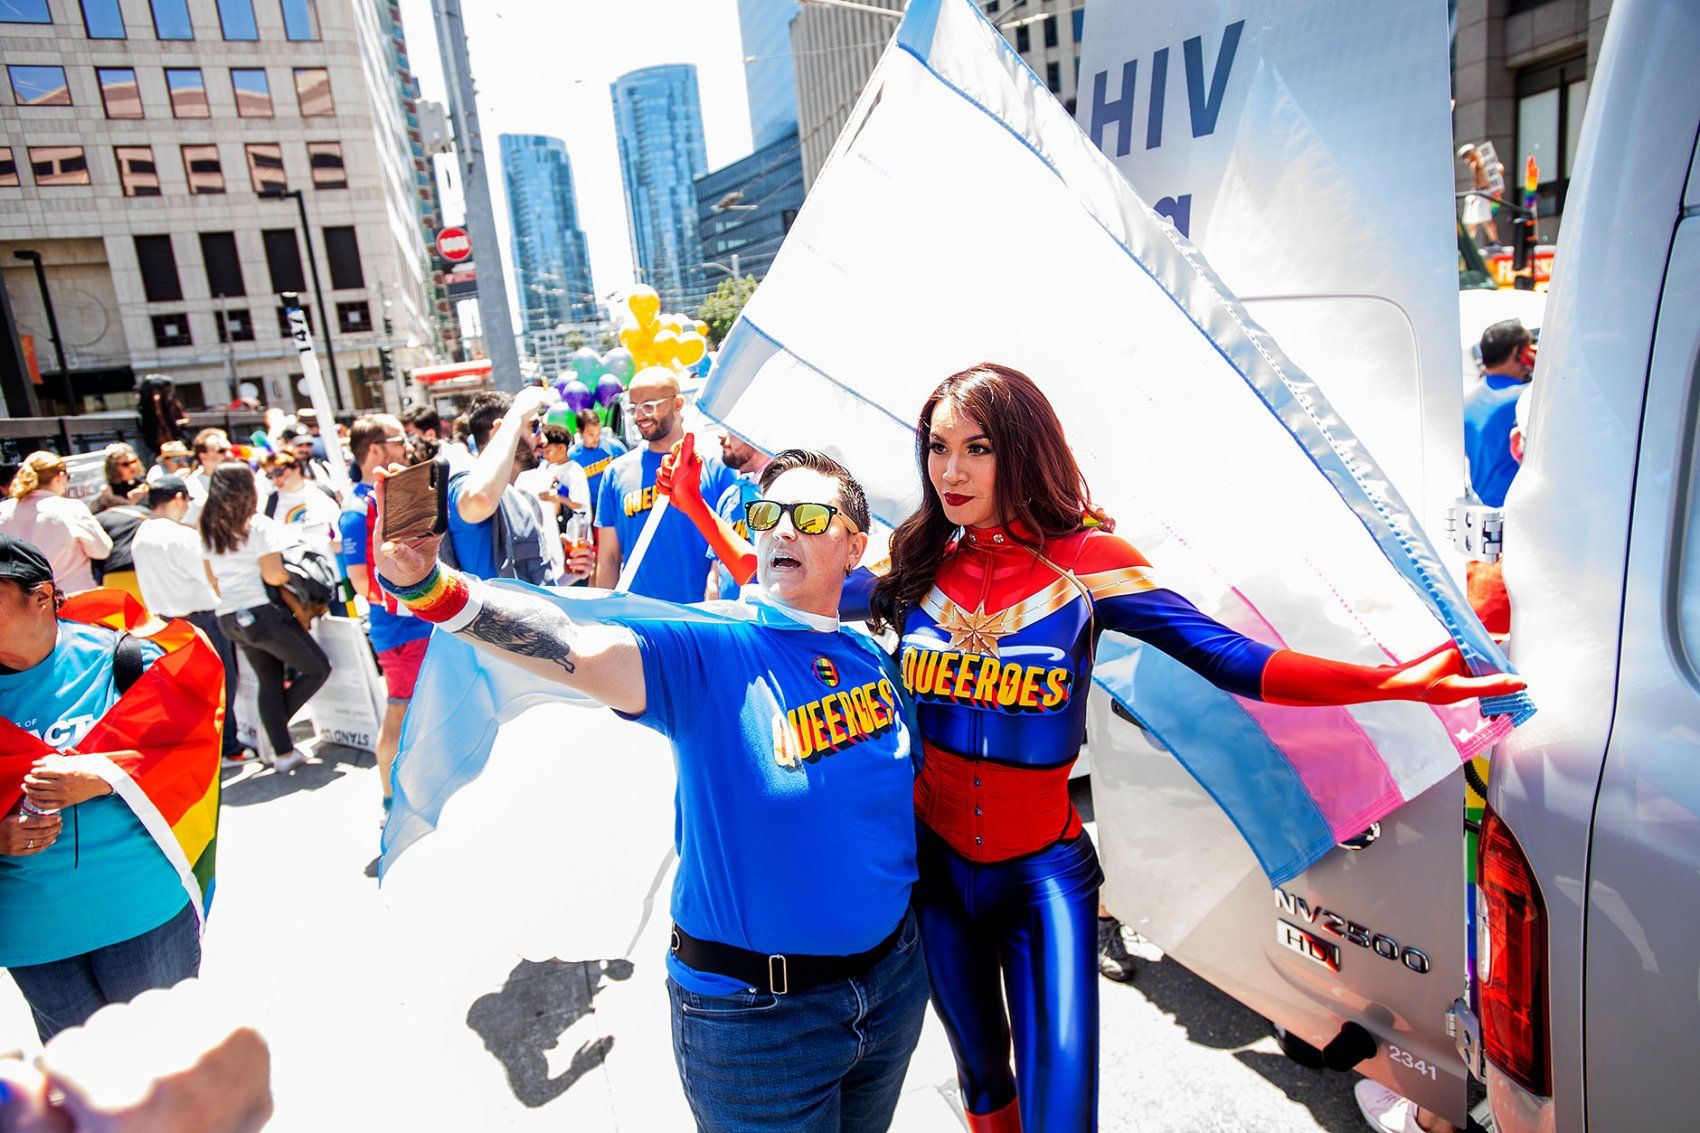 two people pose in outfits that say "Queeroes"